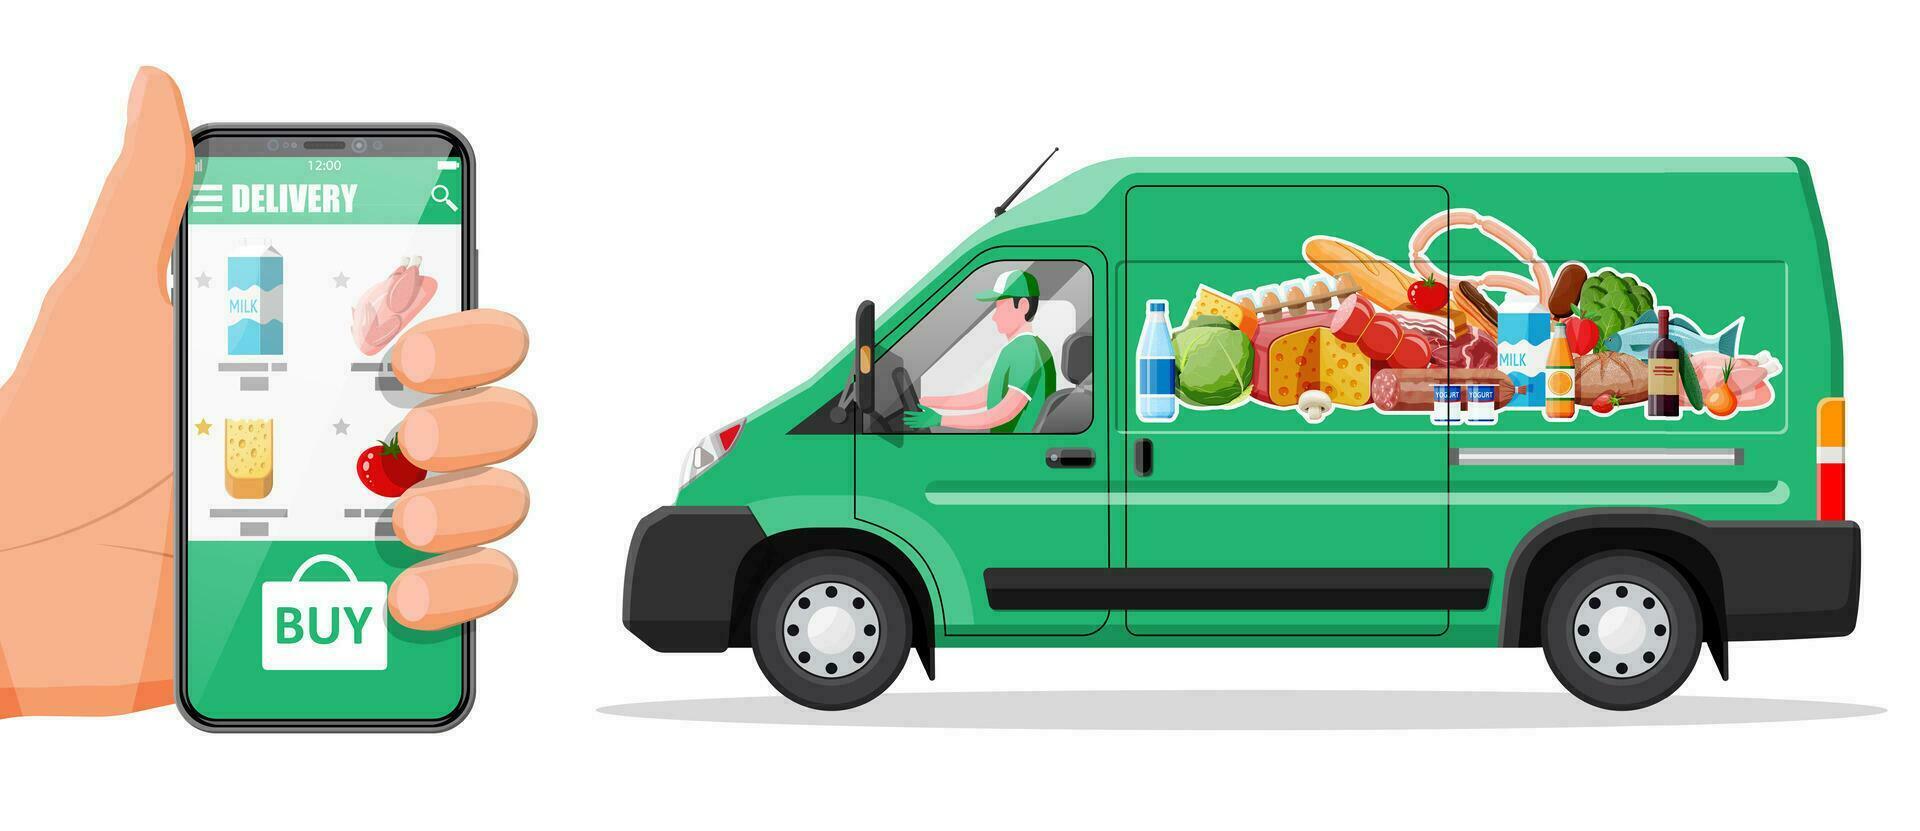 Delivery van full of food and smartphone. Concept of fast grocery delivery service. Supermarket, cafe, restaurant. Groceries products, bread, meat milk fruit vegetable drinks. Flat vector illustration